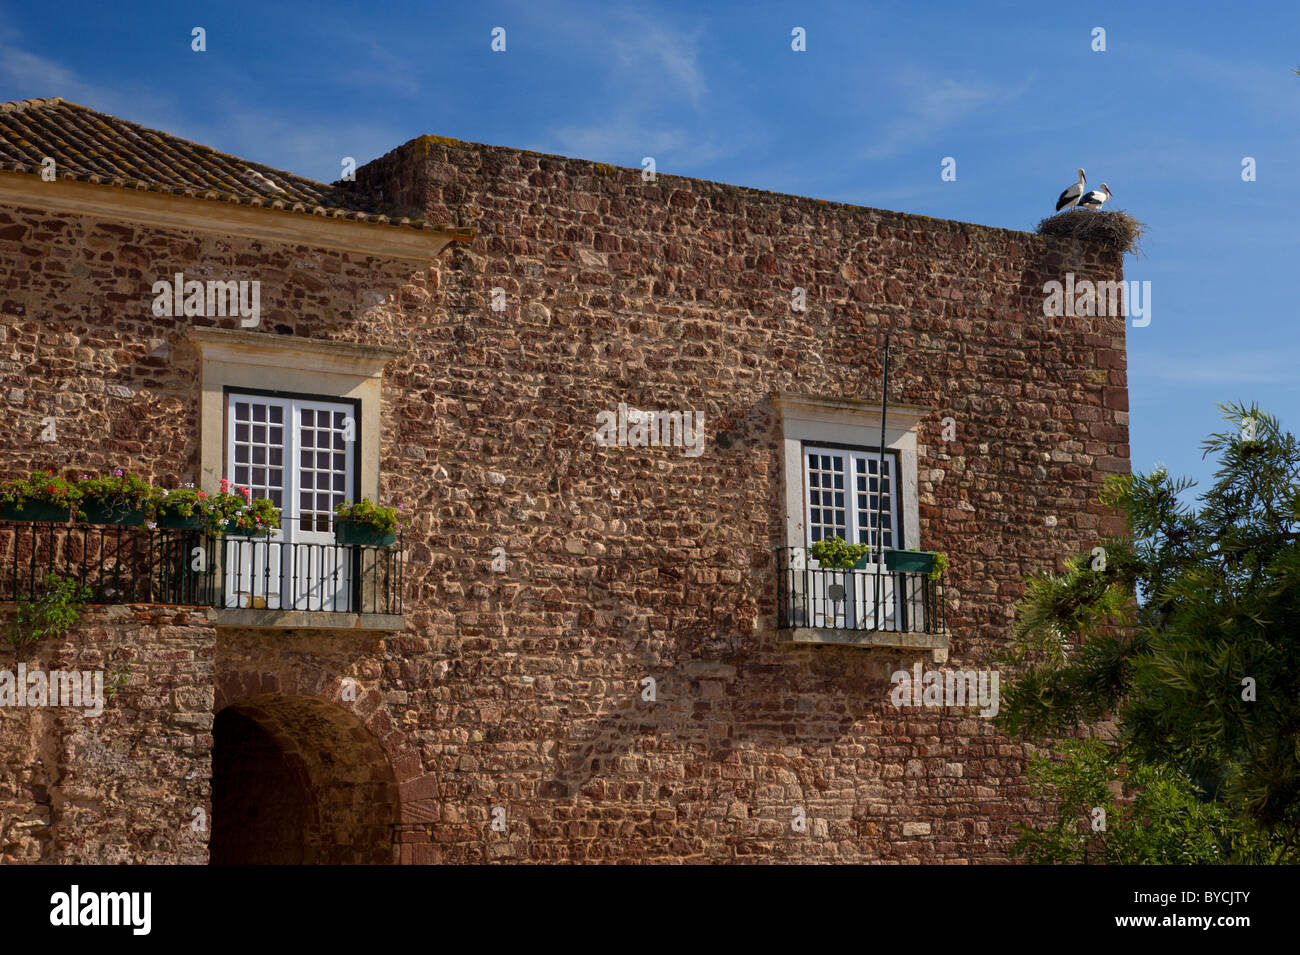 Portugal, the Algarve, medieval tower in the city walls, with a stork's nest on top Stock Photo